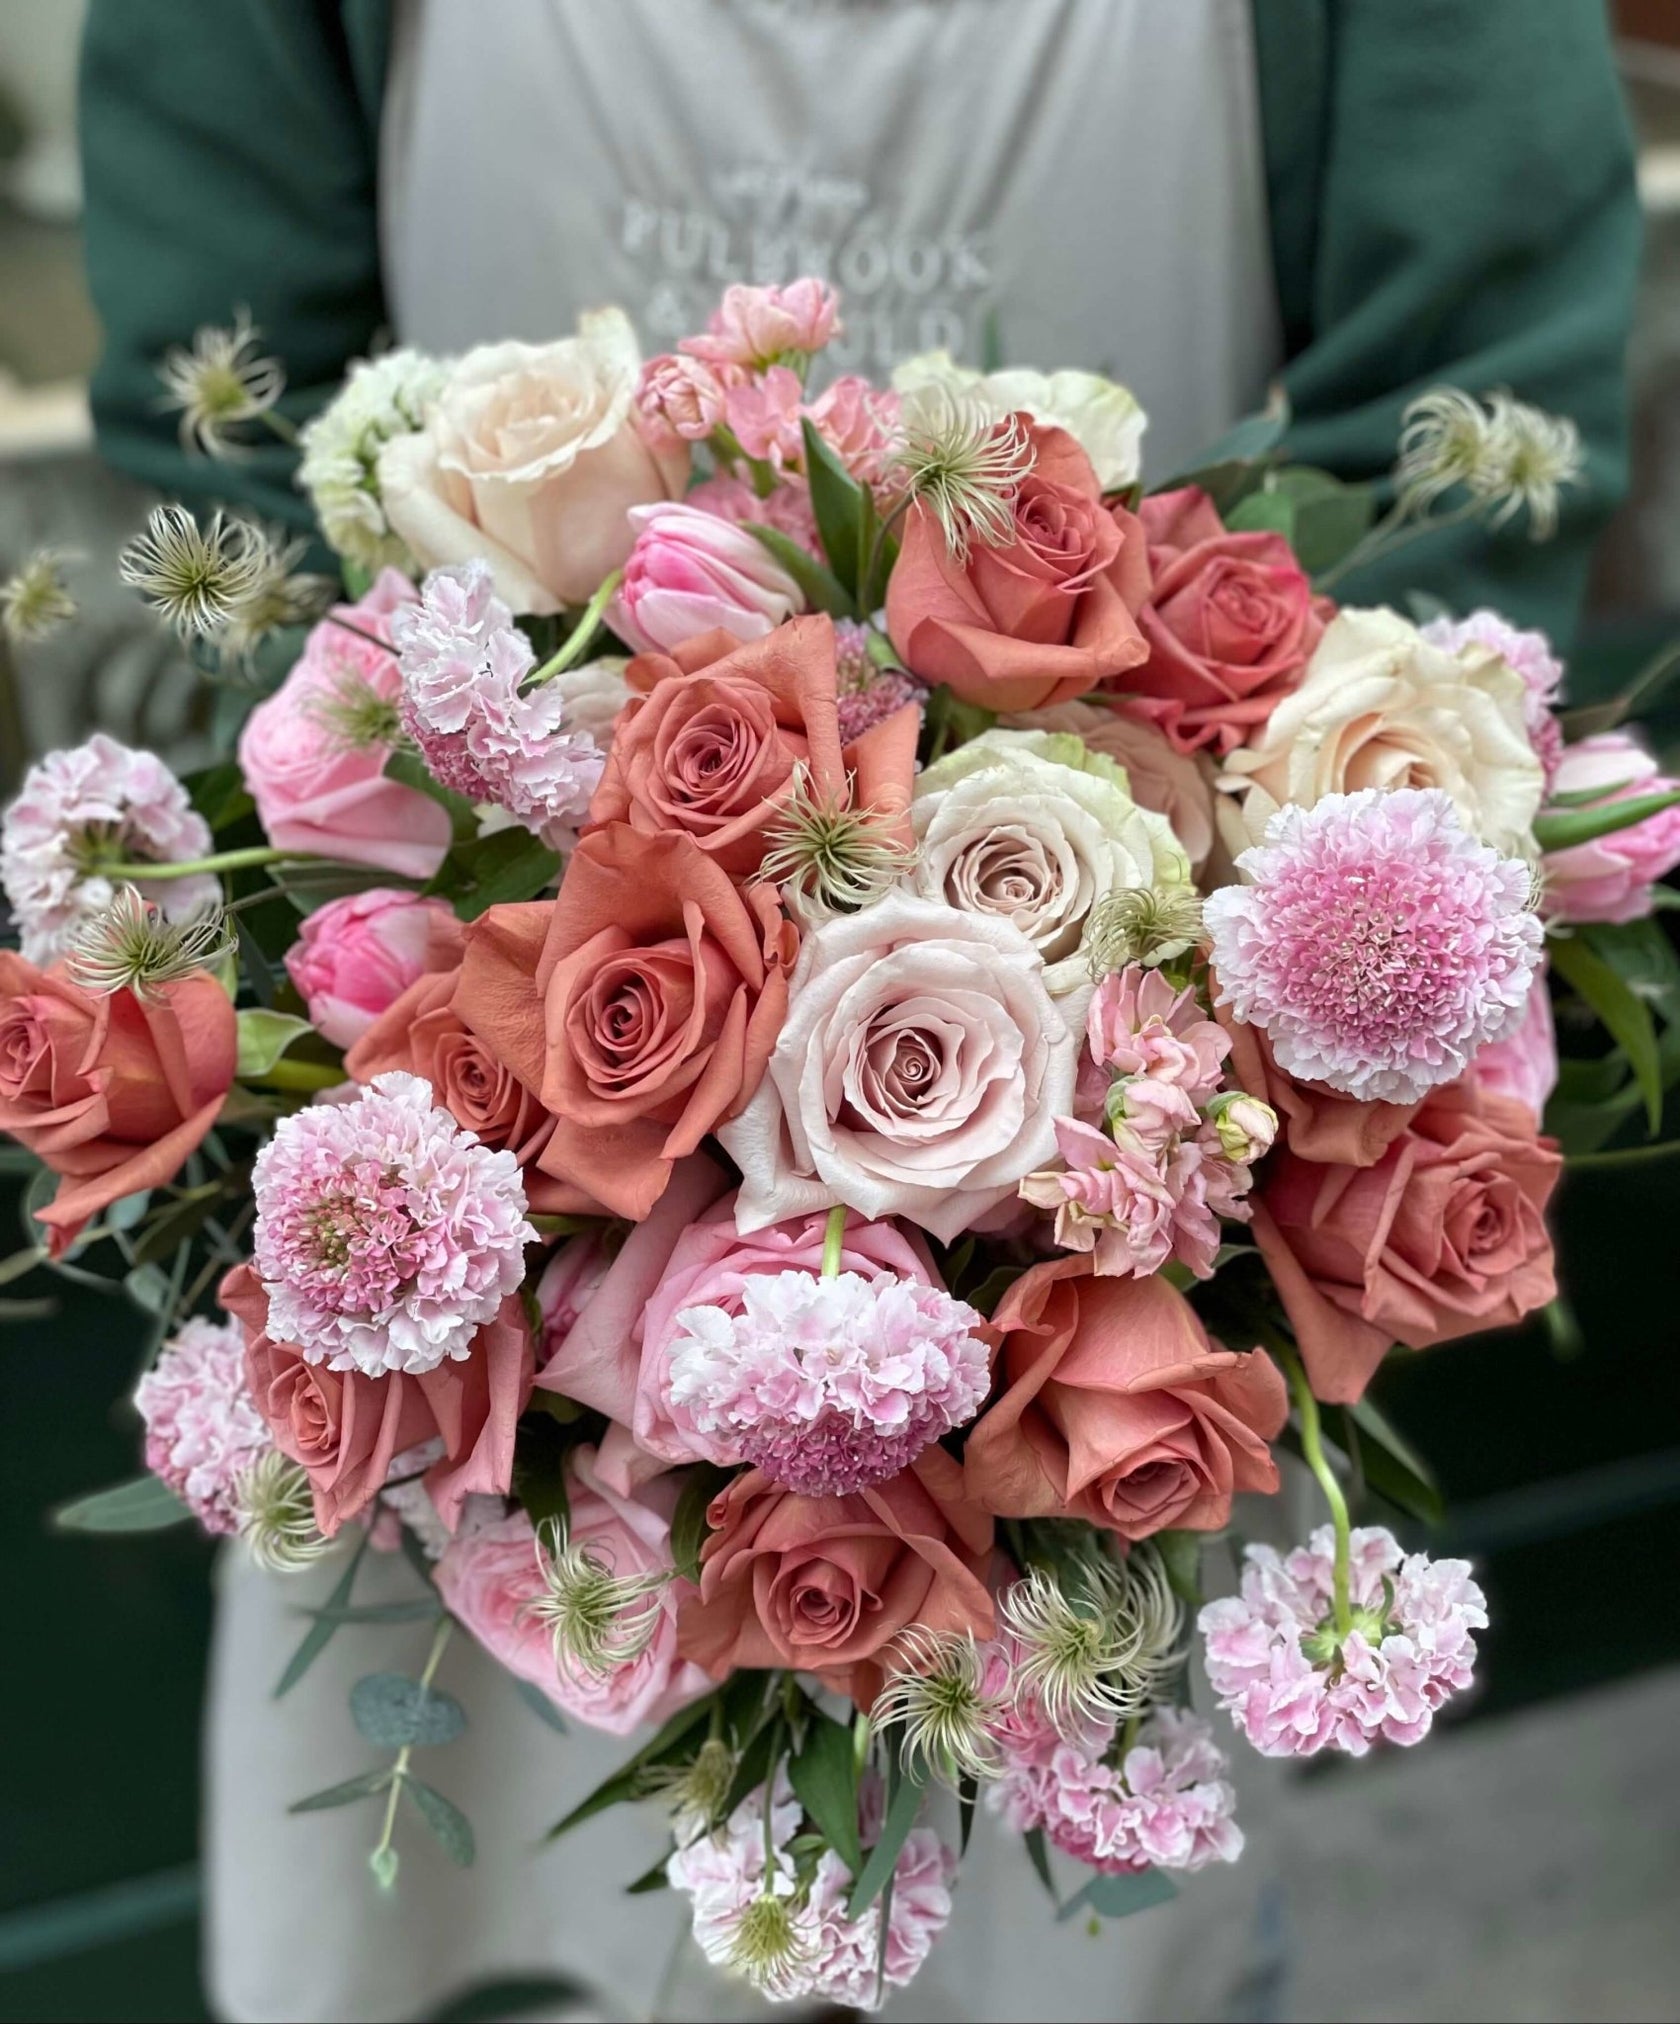 Pulbrook & Gould Luxury Florist - Flowers Delivered in London & Around ...